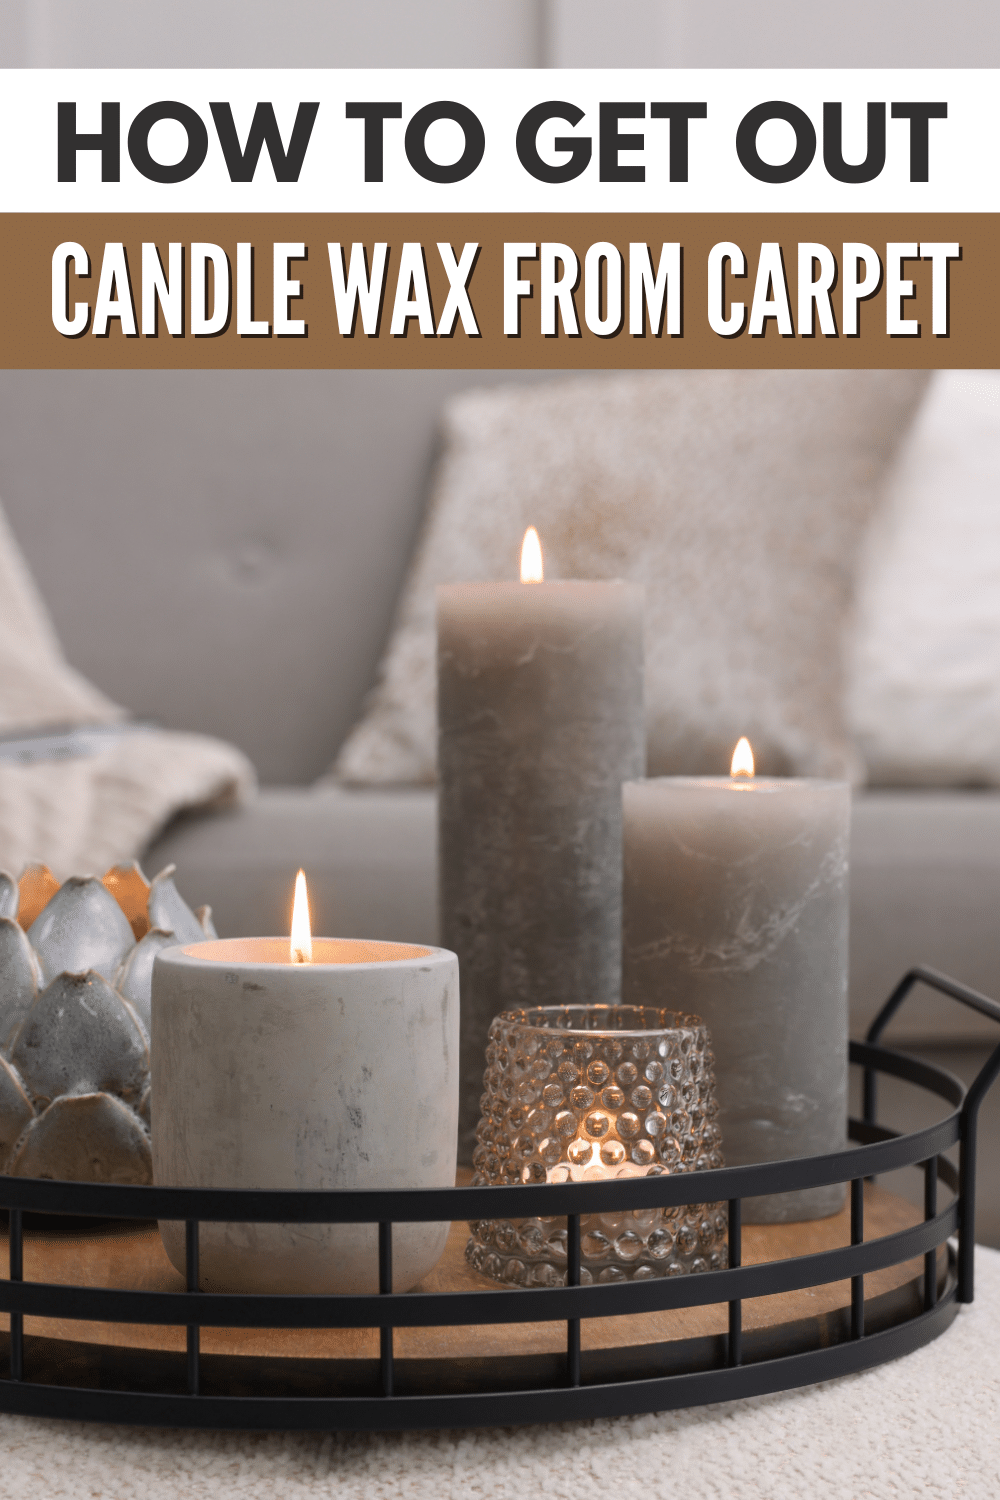 Removing candle wax from carpet.